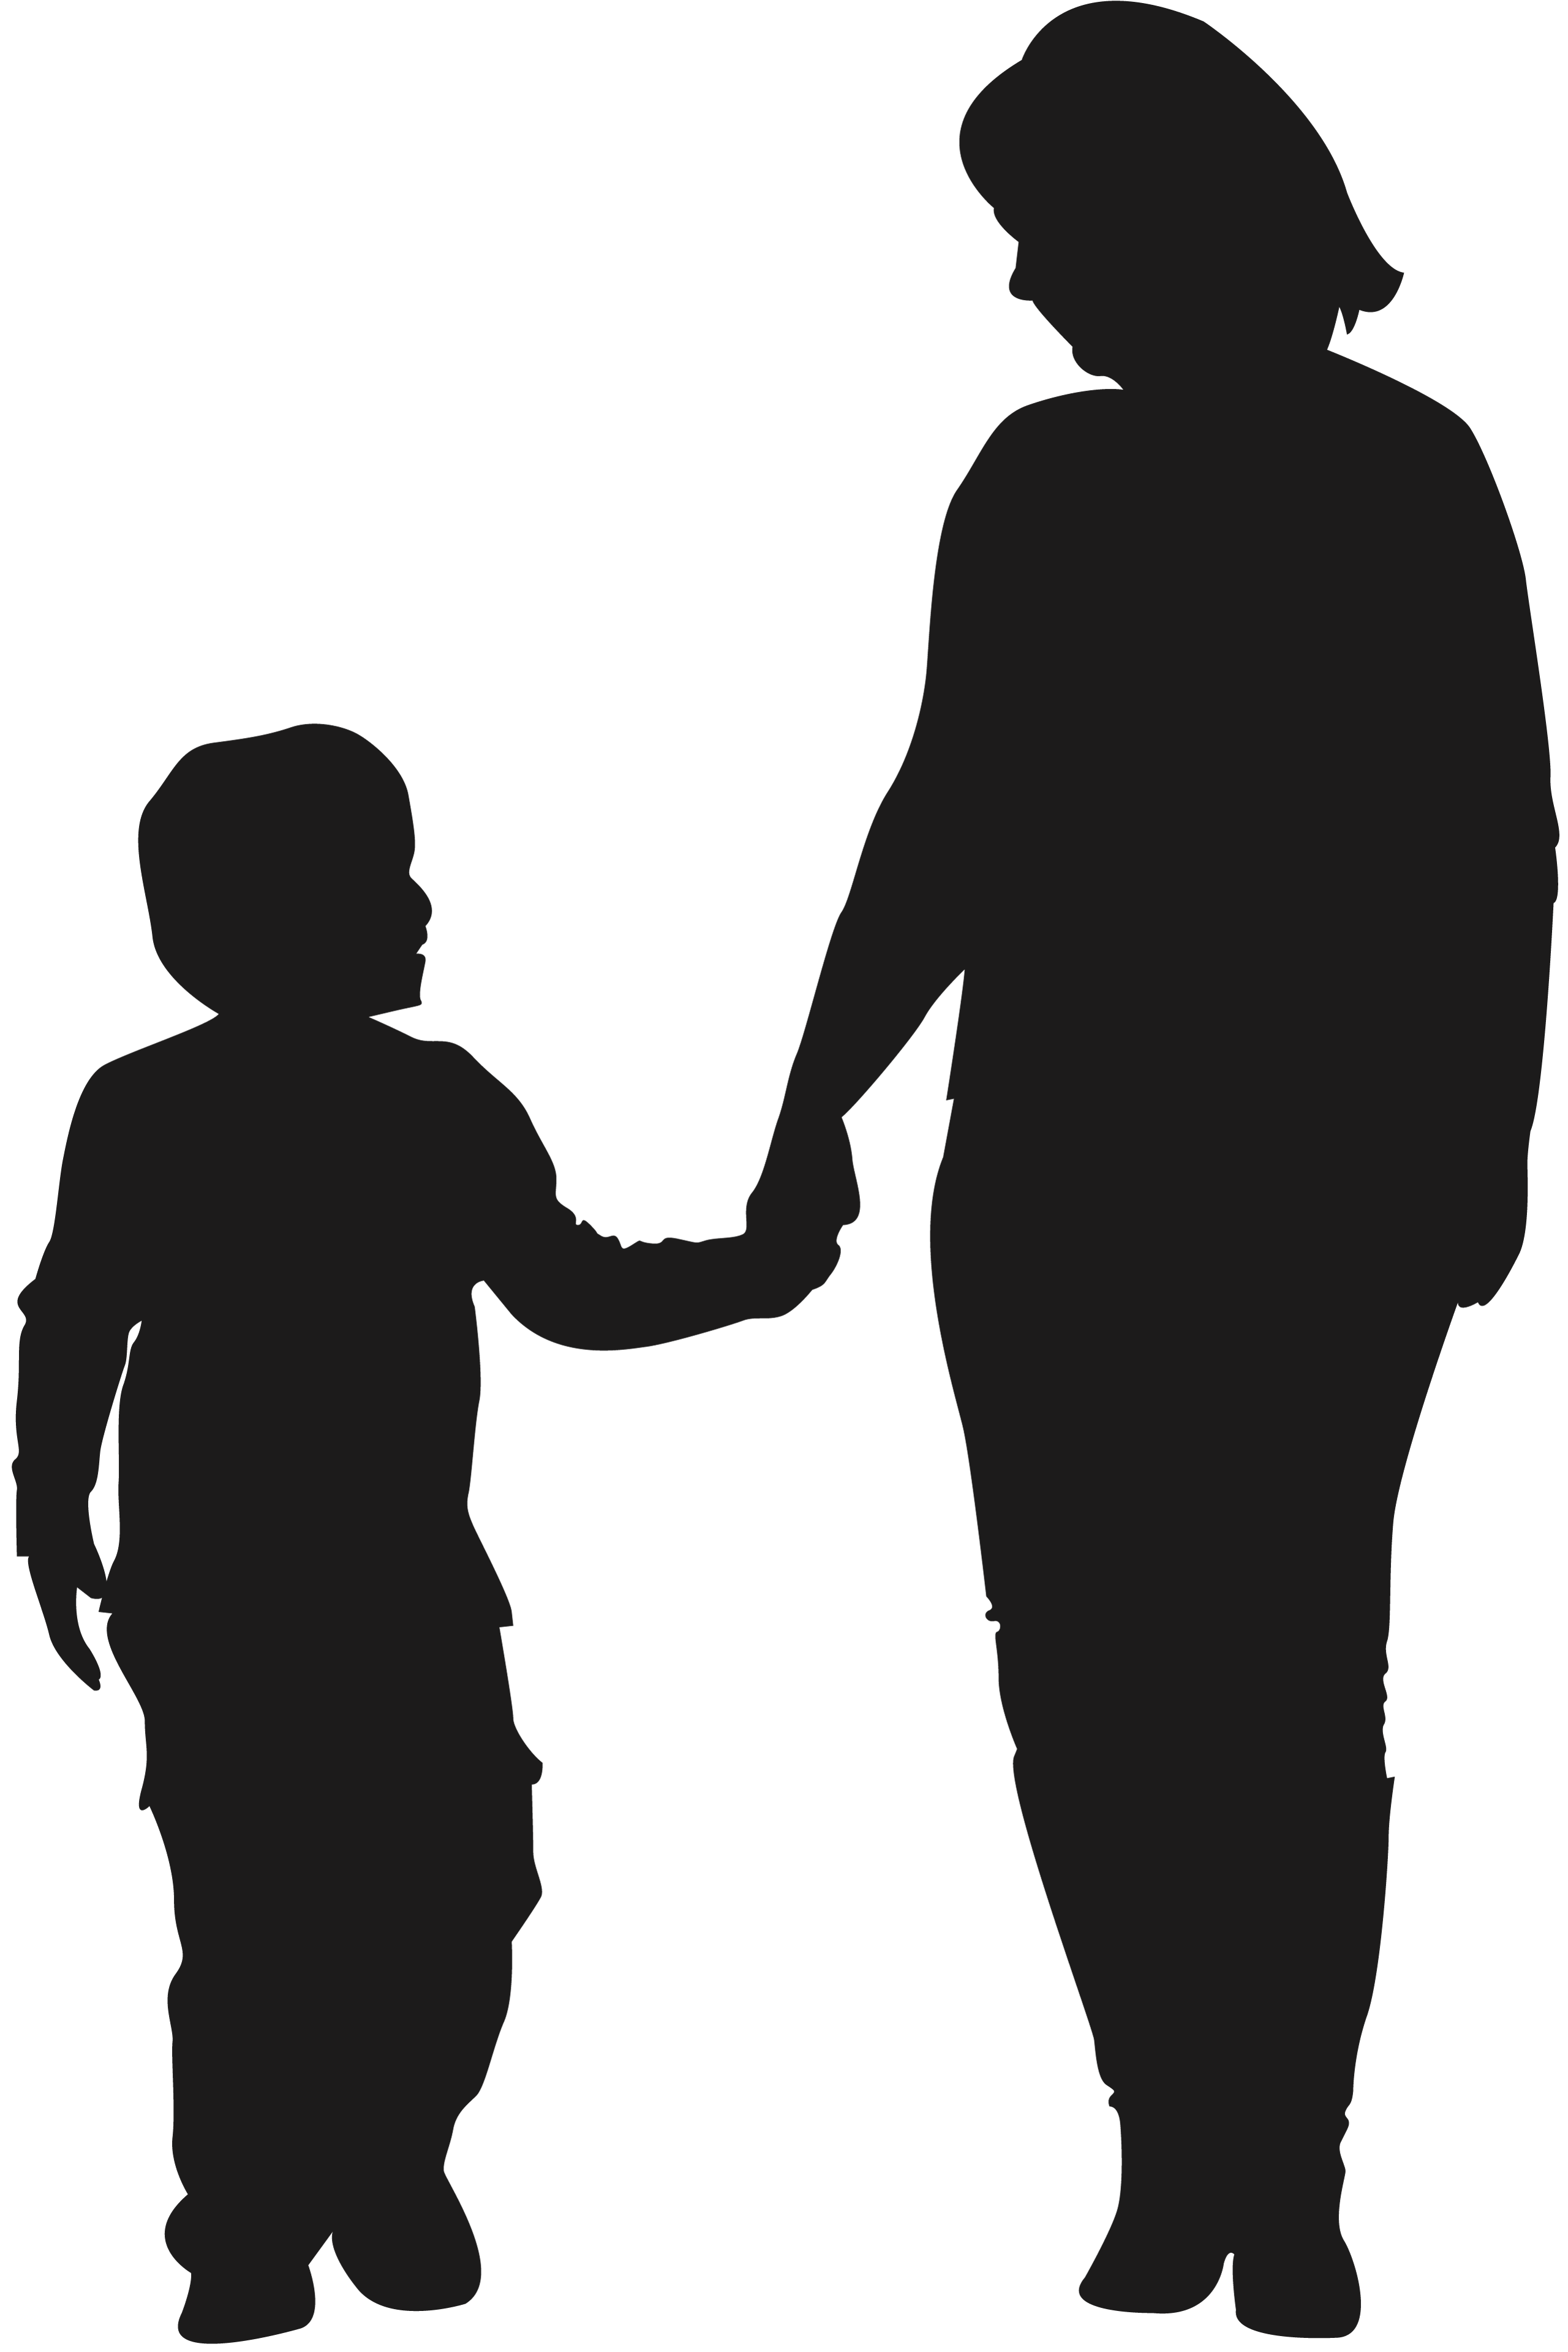 Group Of People With Kids Silhouette